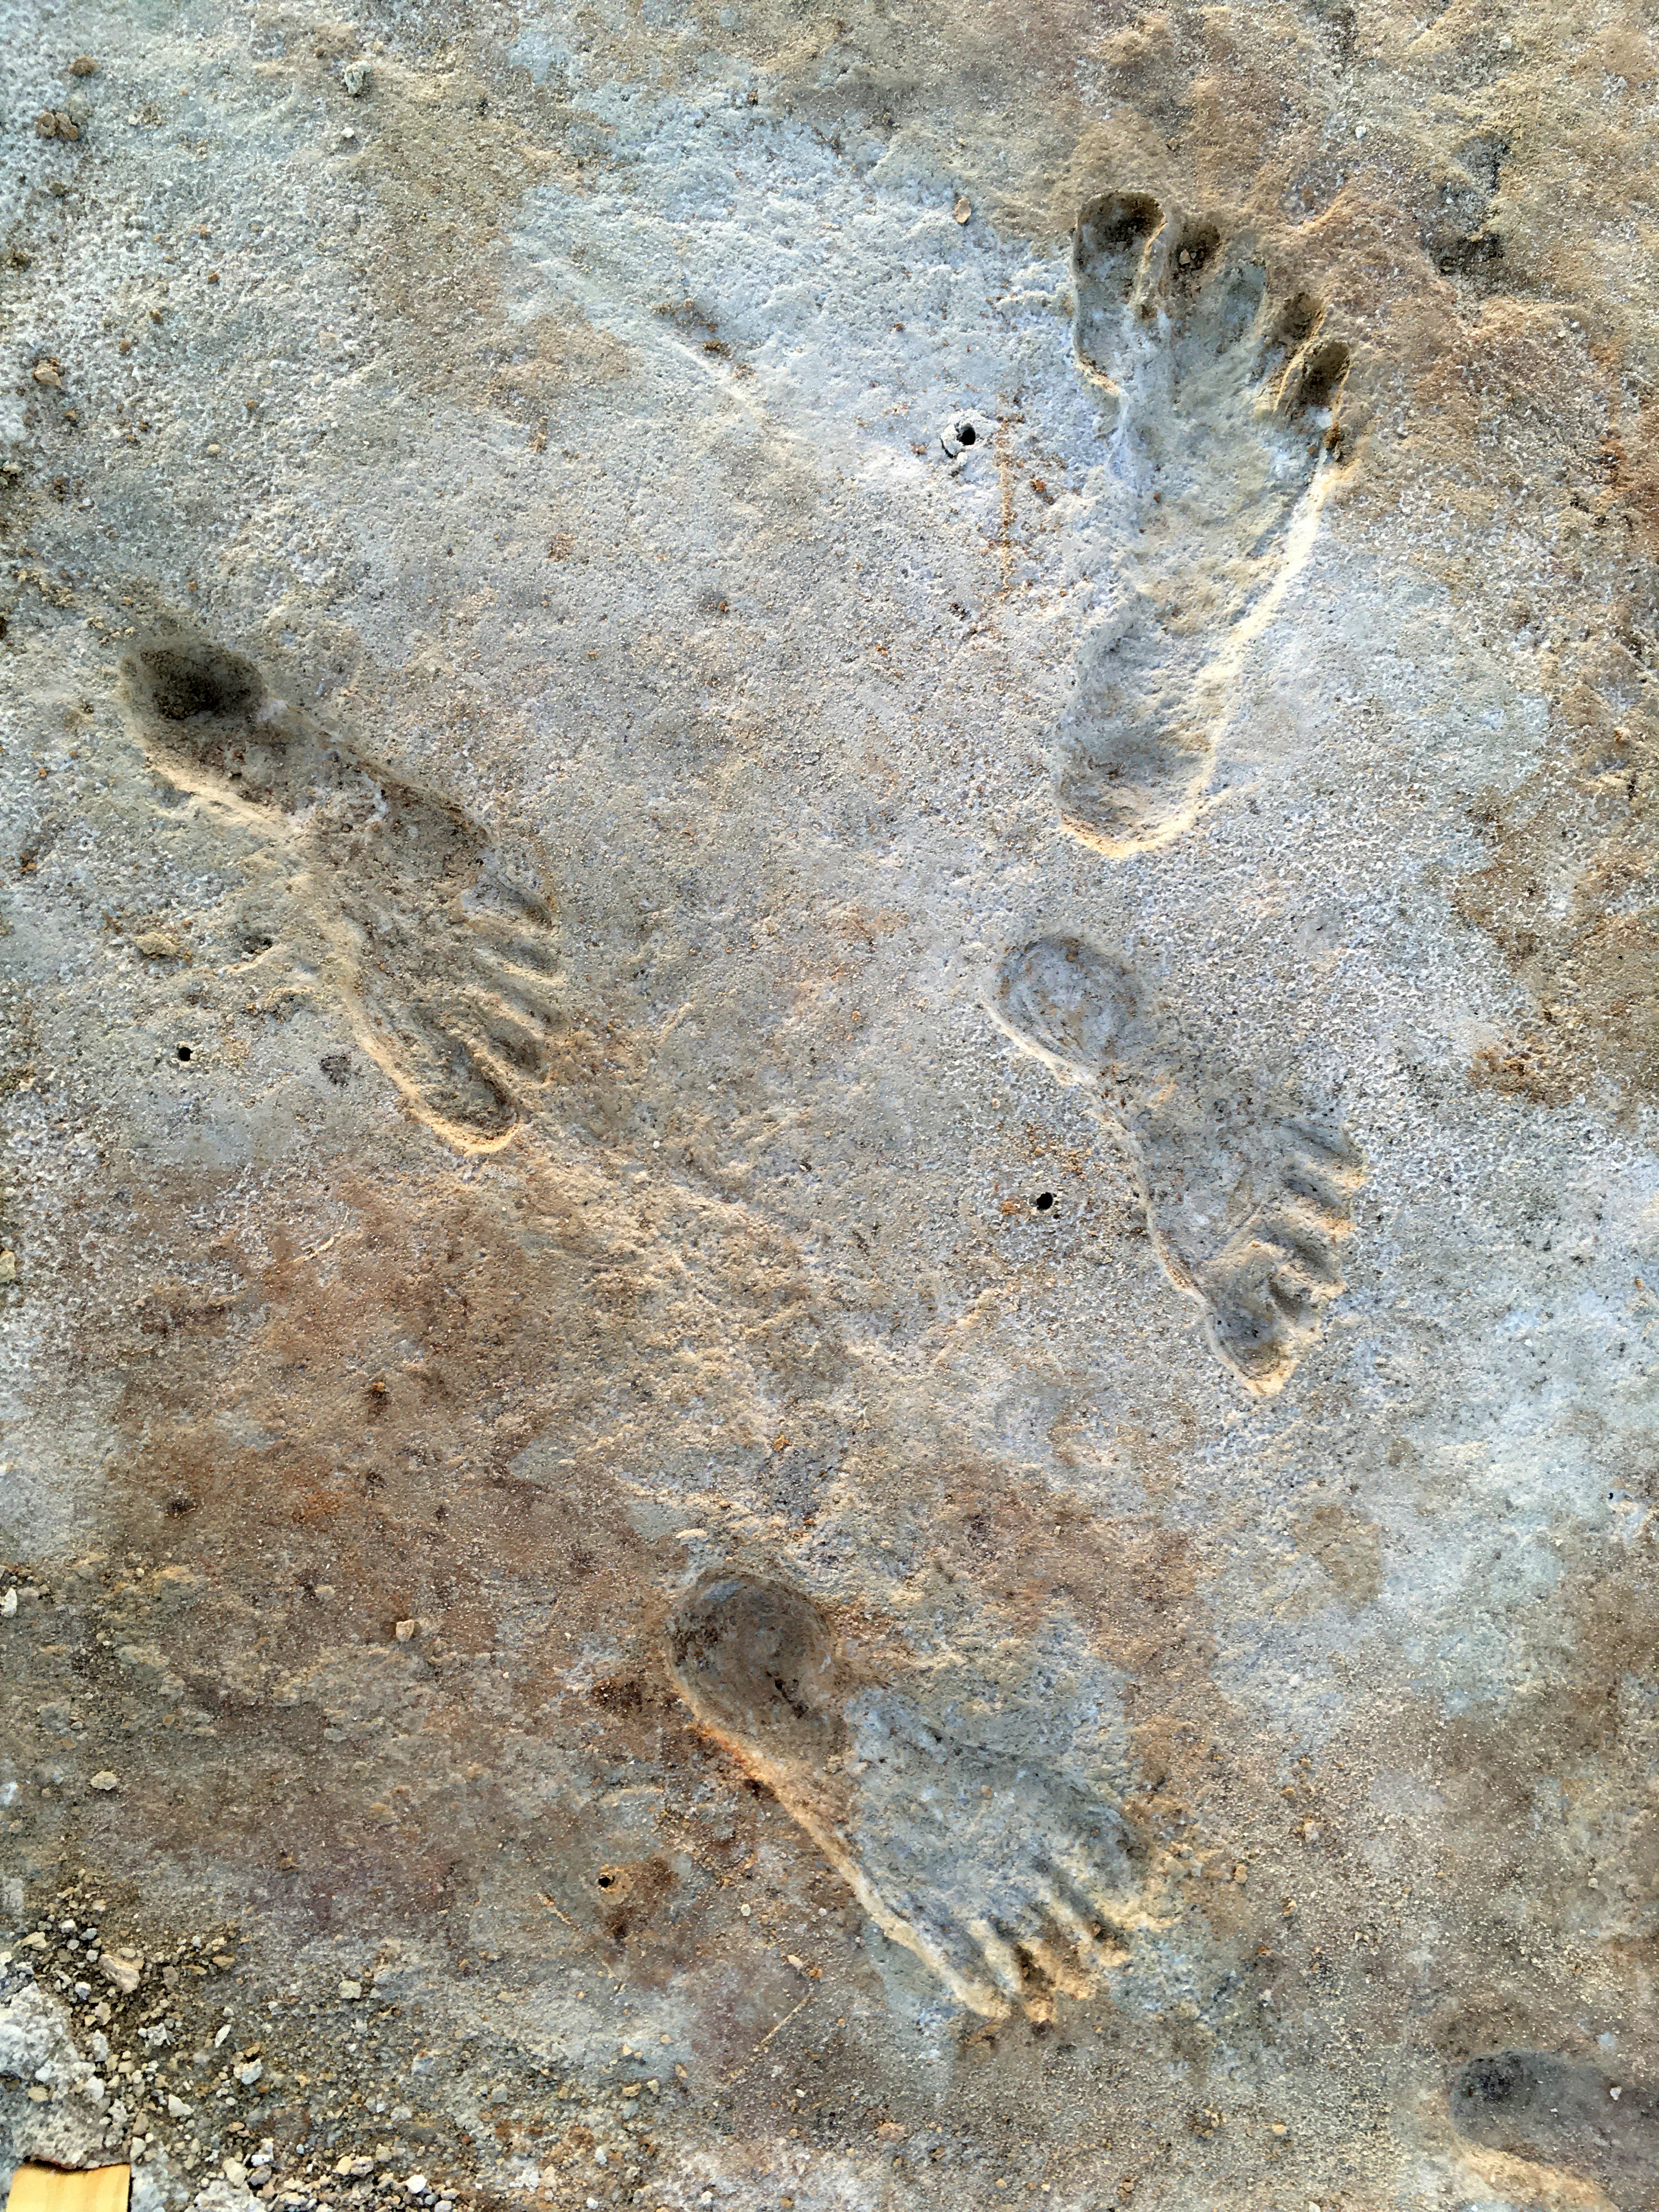 Four fossilized footprints in a light, mottled surface.